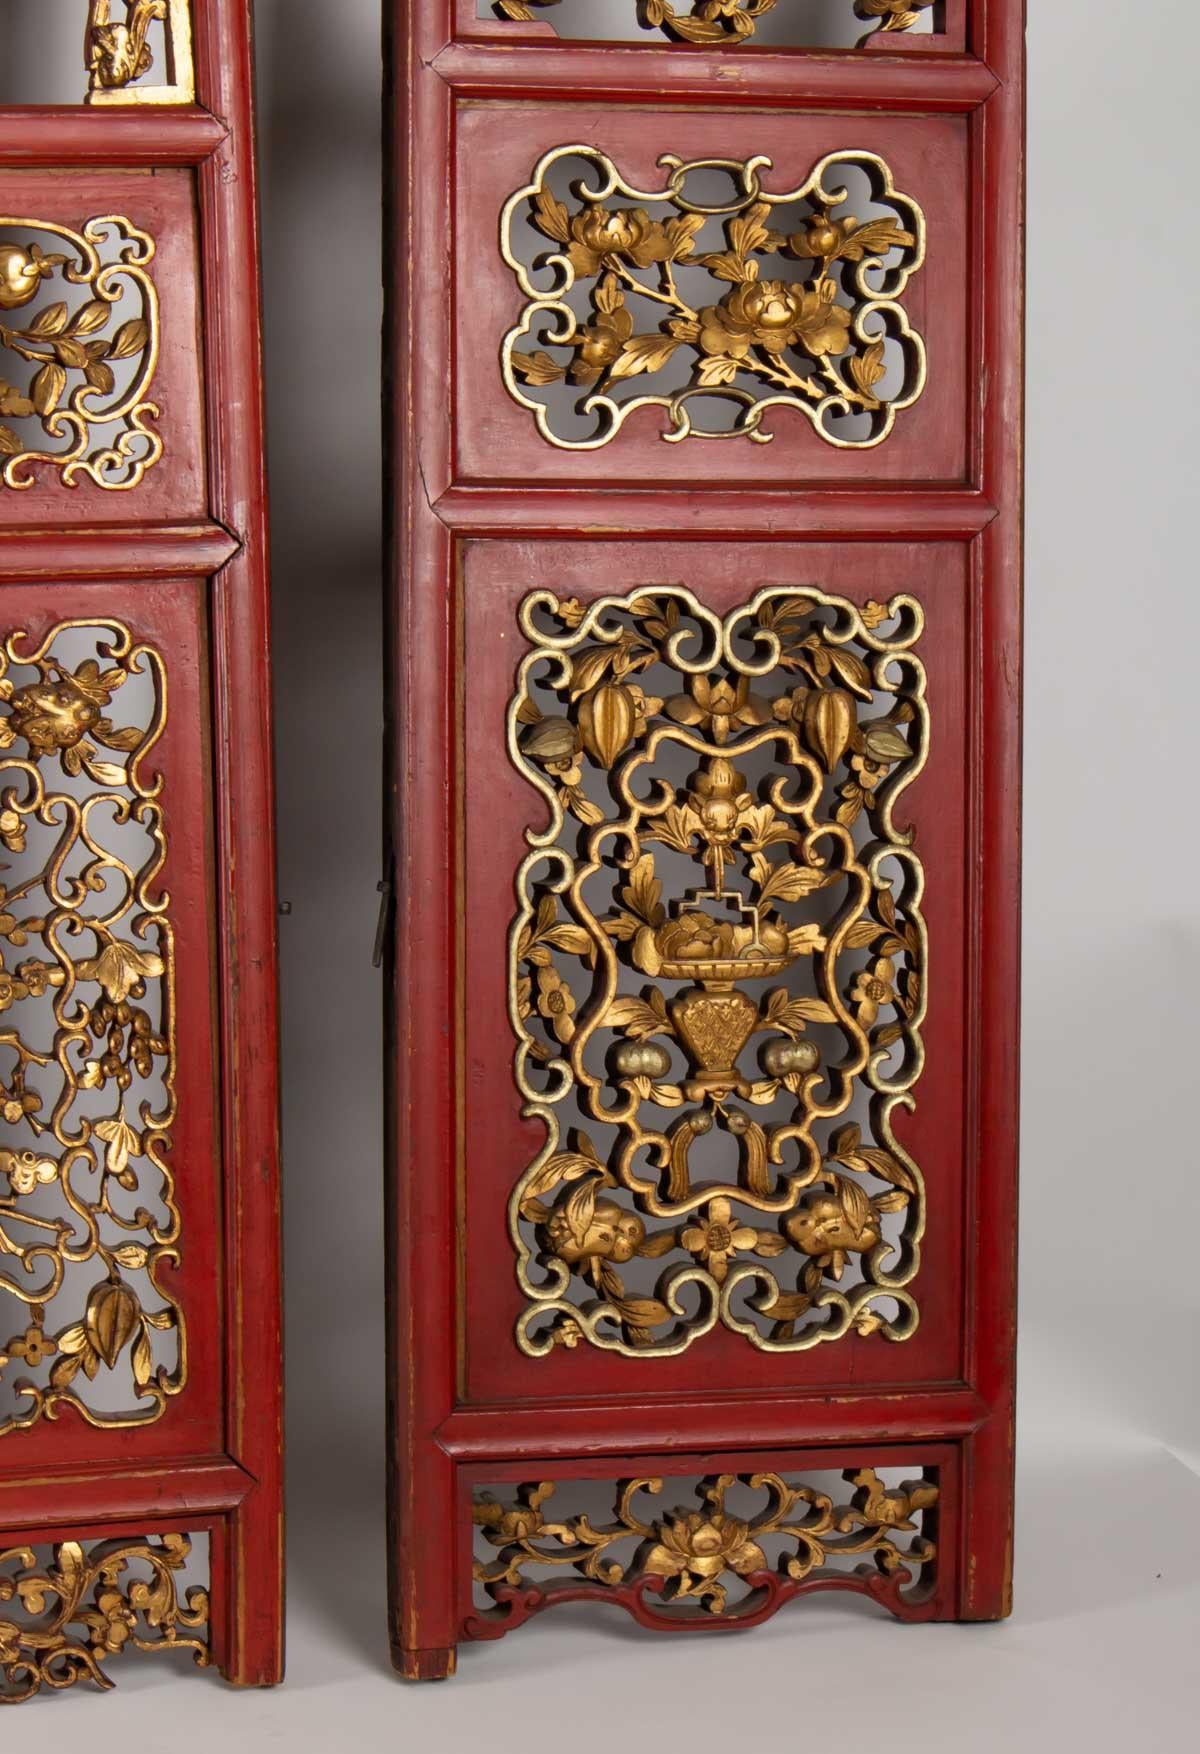 4-Panel Red and Gold in Openwork Wood and Carved Fruit, Flowers and Symbols 7